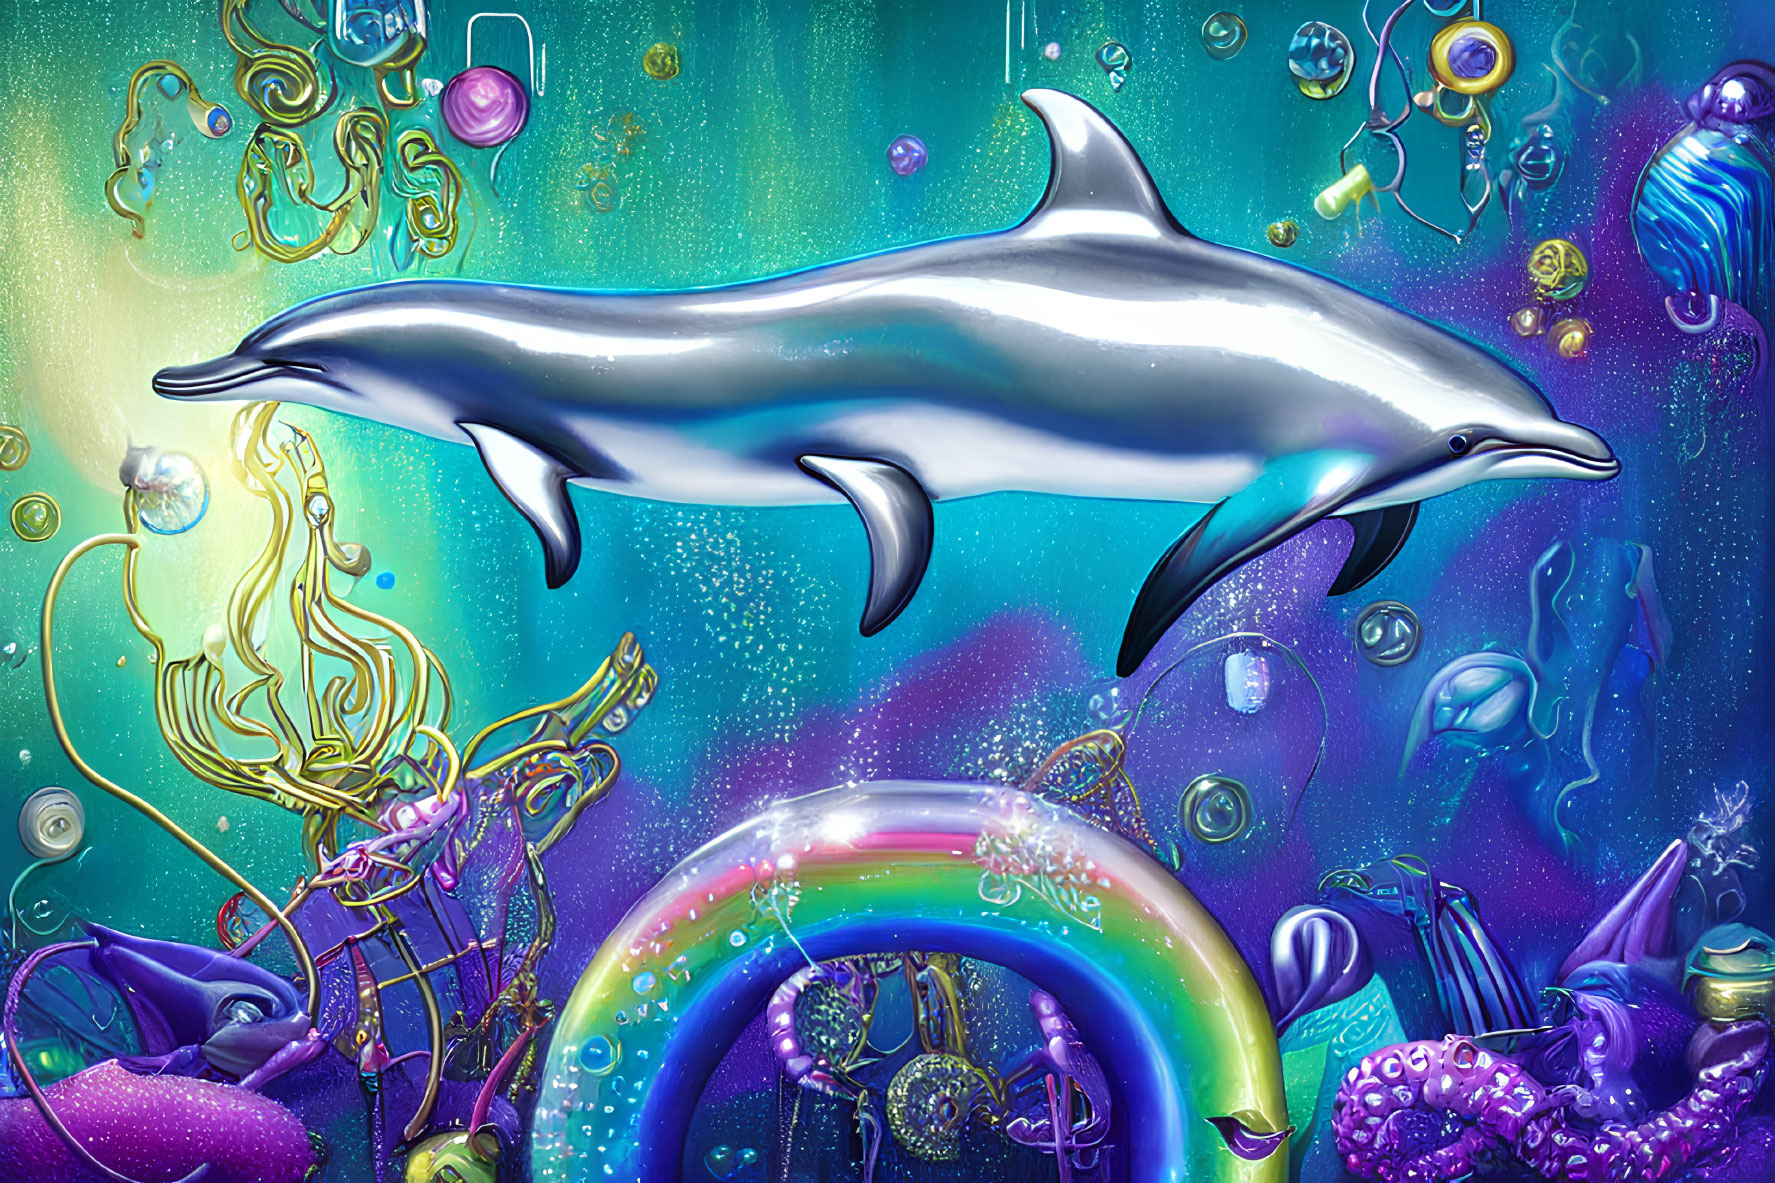 Colorful Dolphin Leaping in Surreal Underwater Art